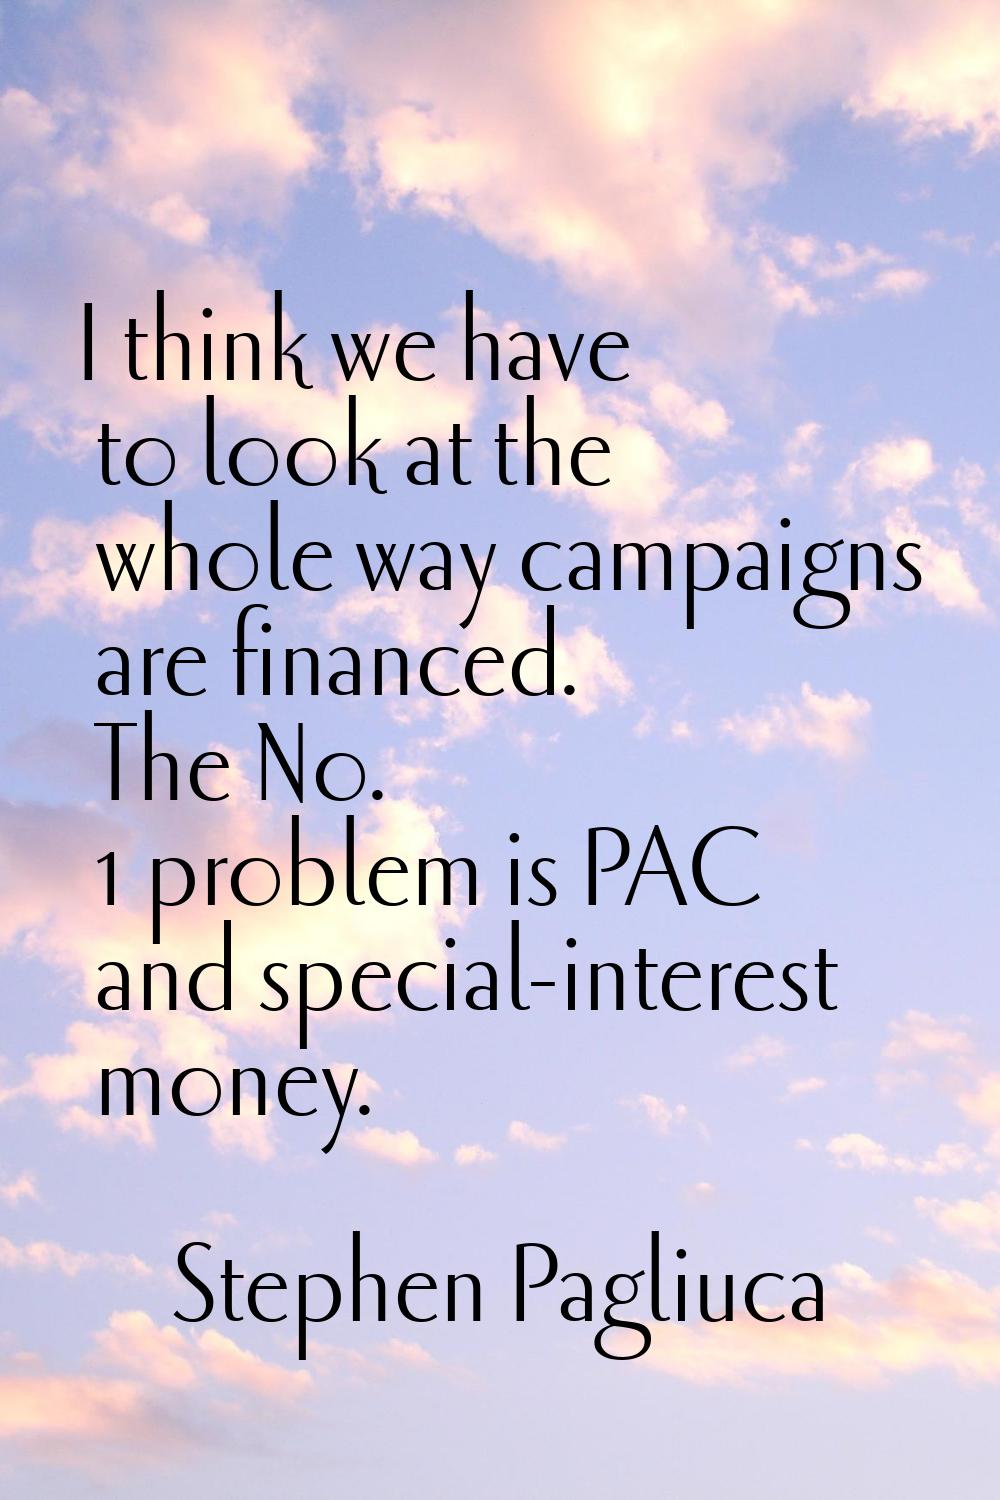 I think we have to look at the whole way campaigns are financed. The No. 1 problem is PAC and speci